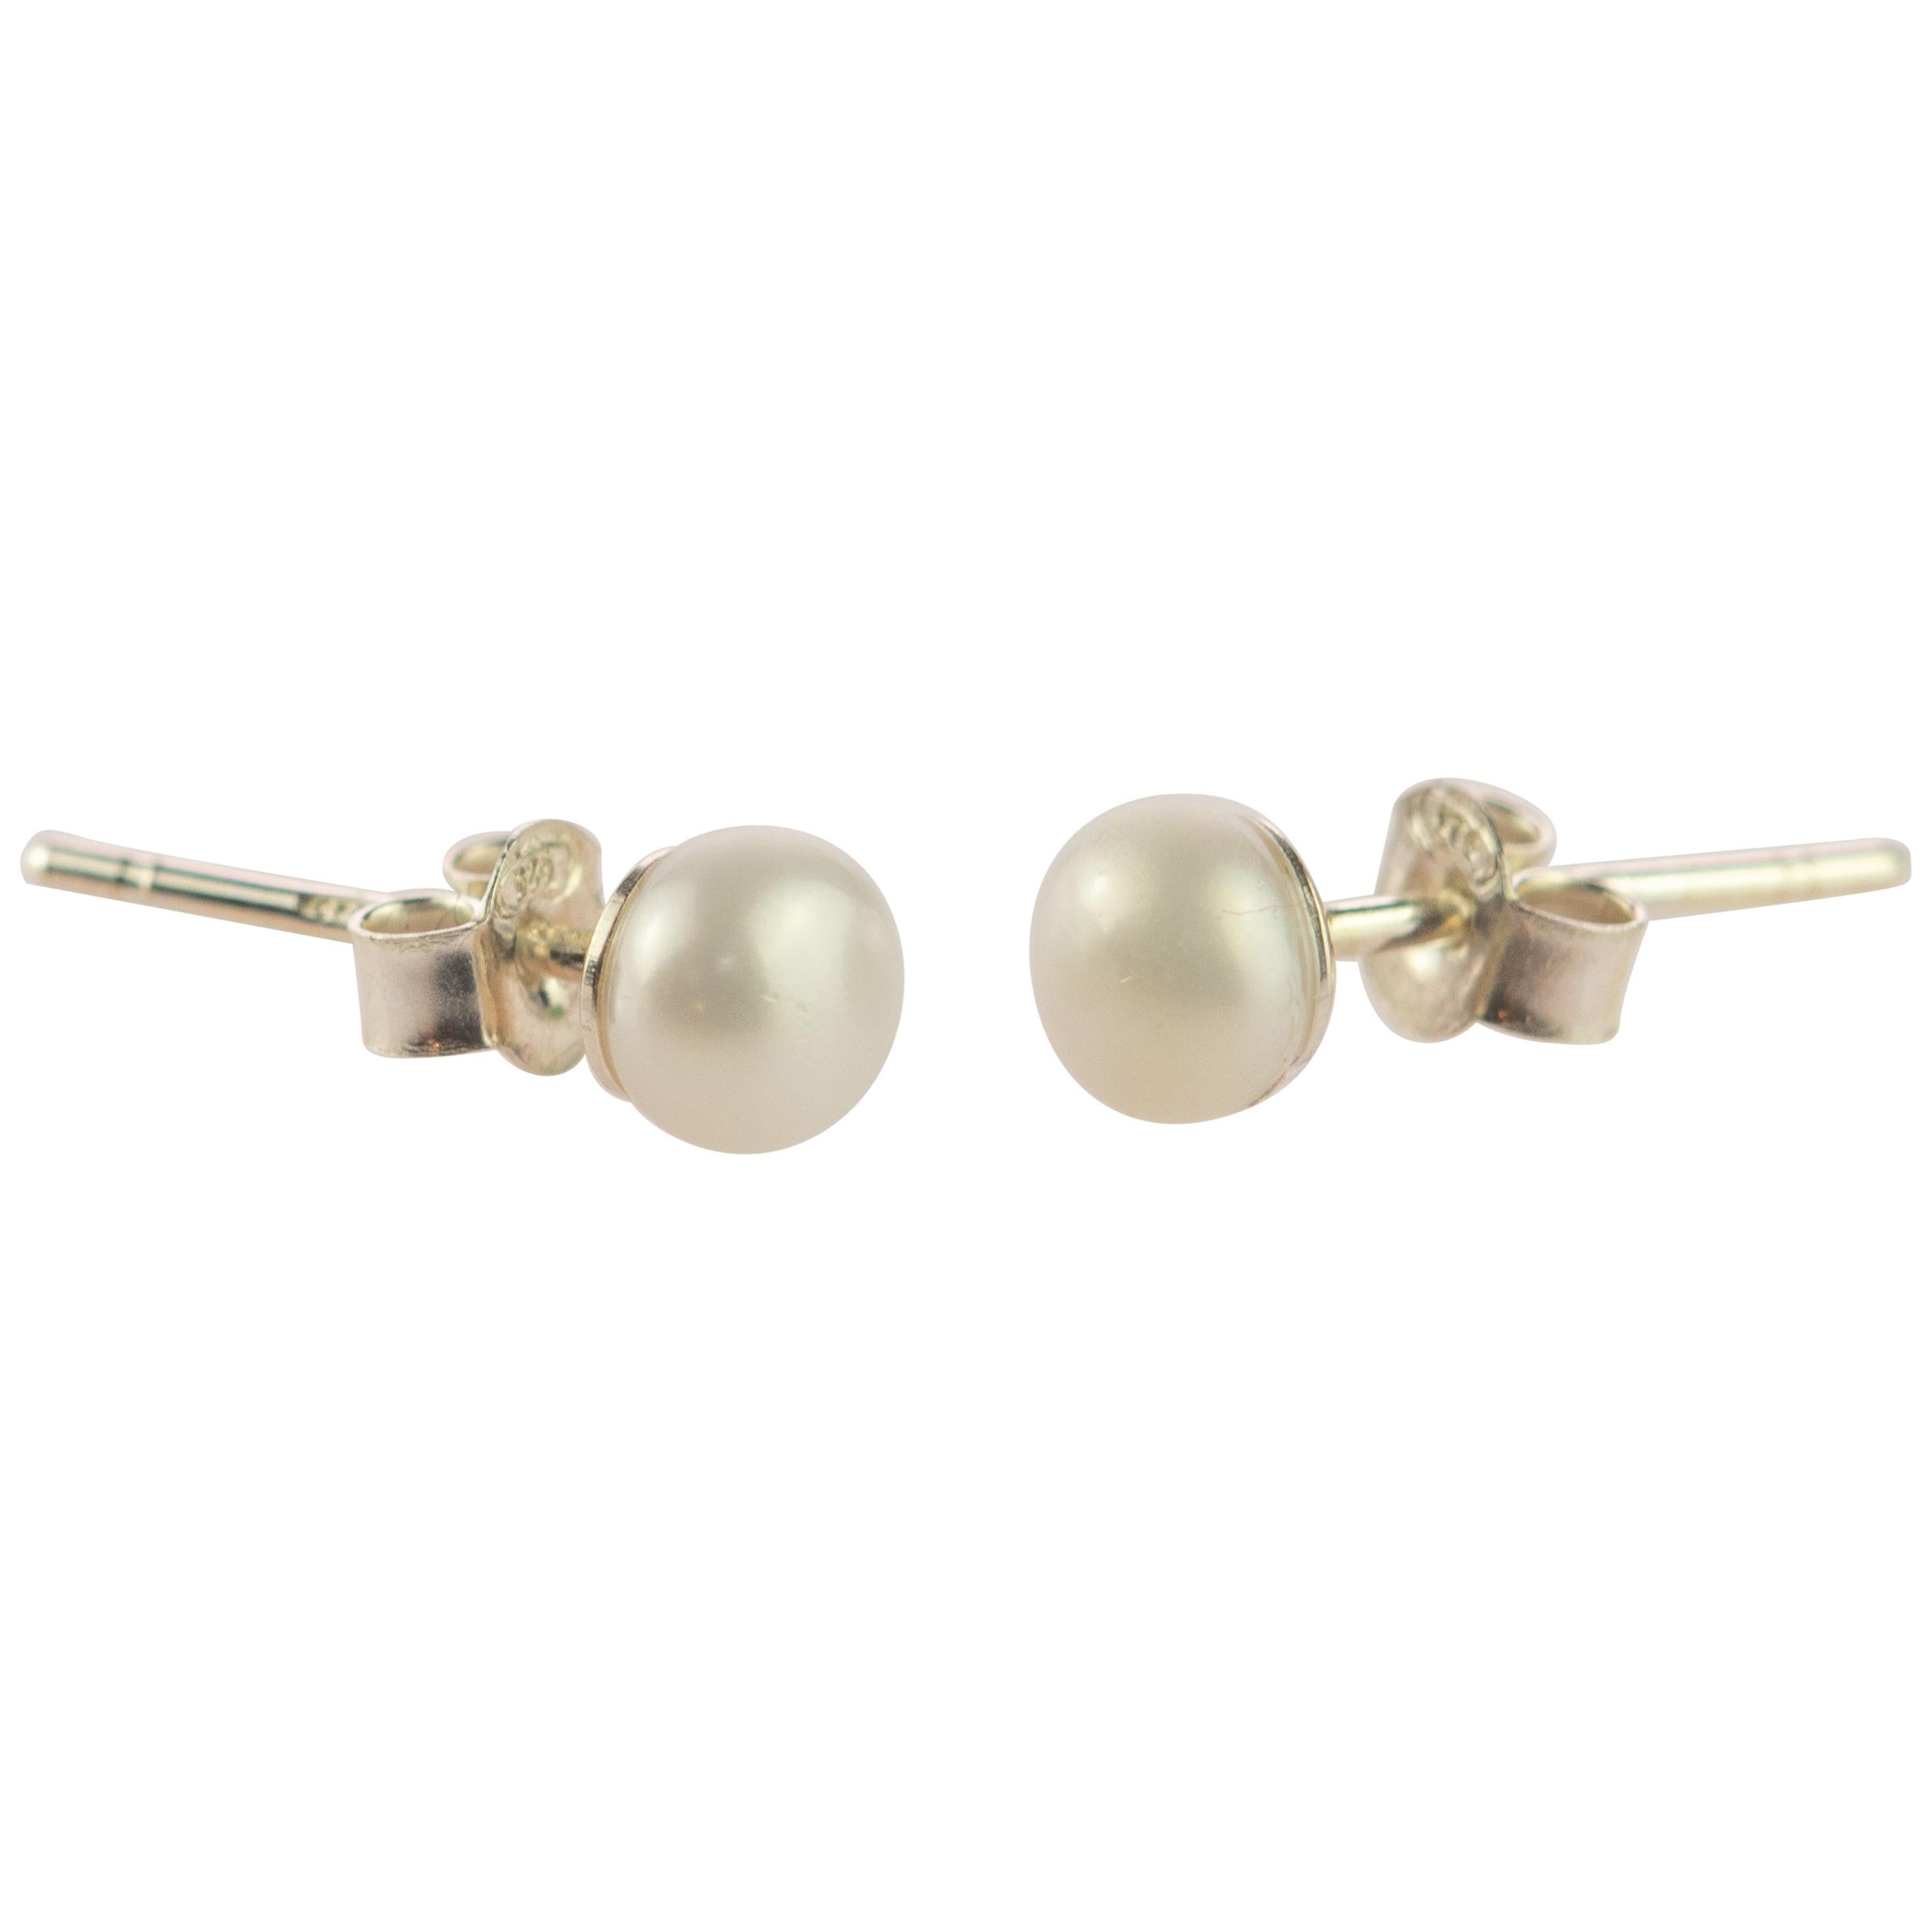 Triple White Freshwater Pearl & .925 STERLING SILVER Earrings Handcrafted